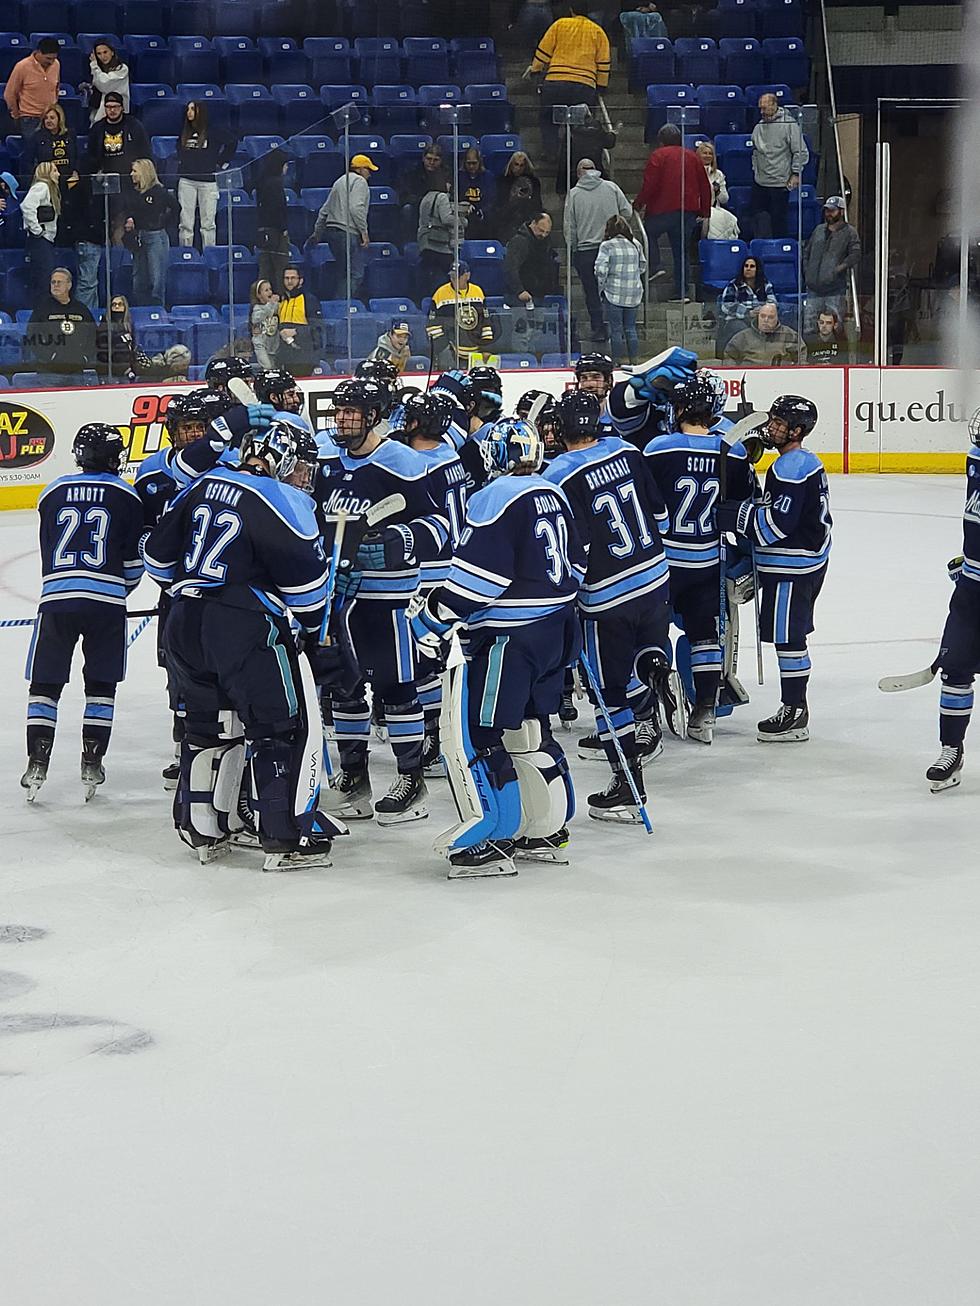 Maine Remains Unbeaten Steals 2-1 Win in OT Over #5 Quinnipiac on the Road